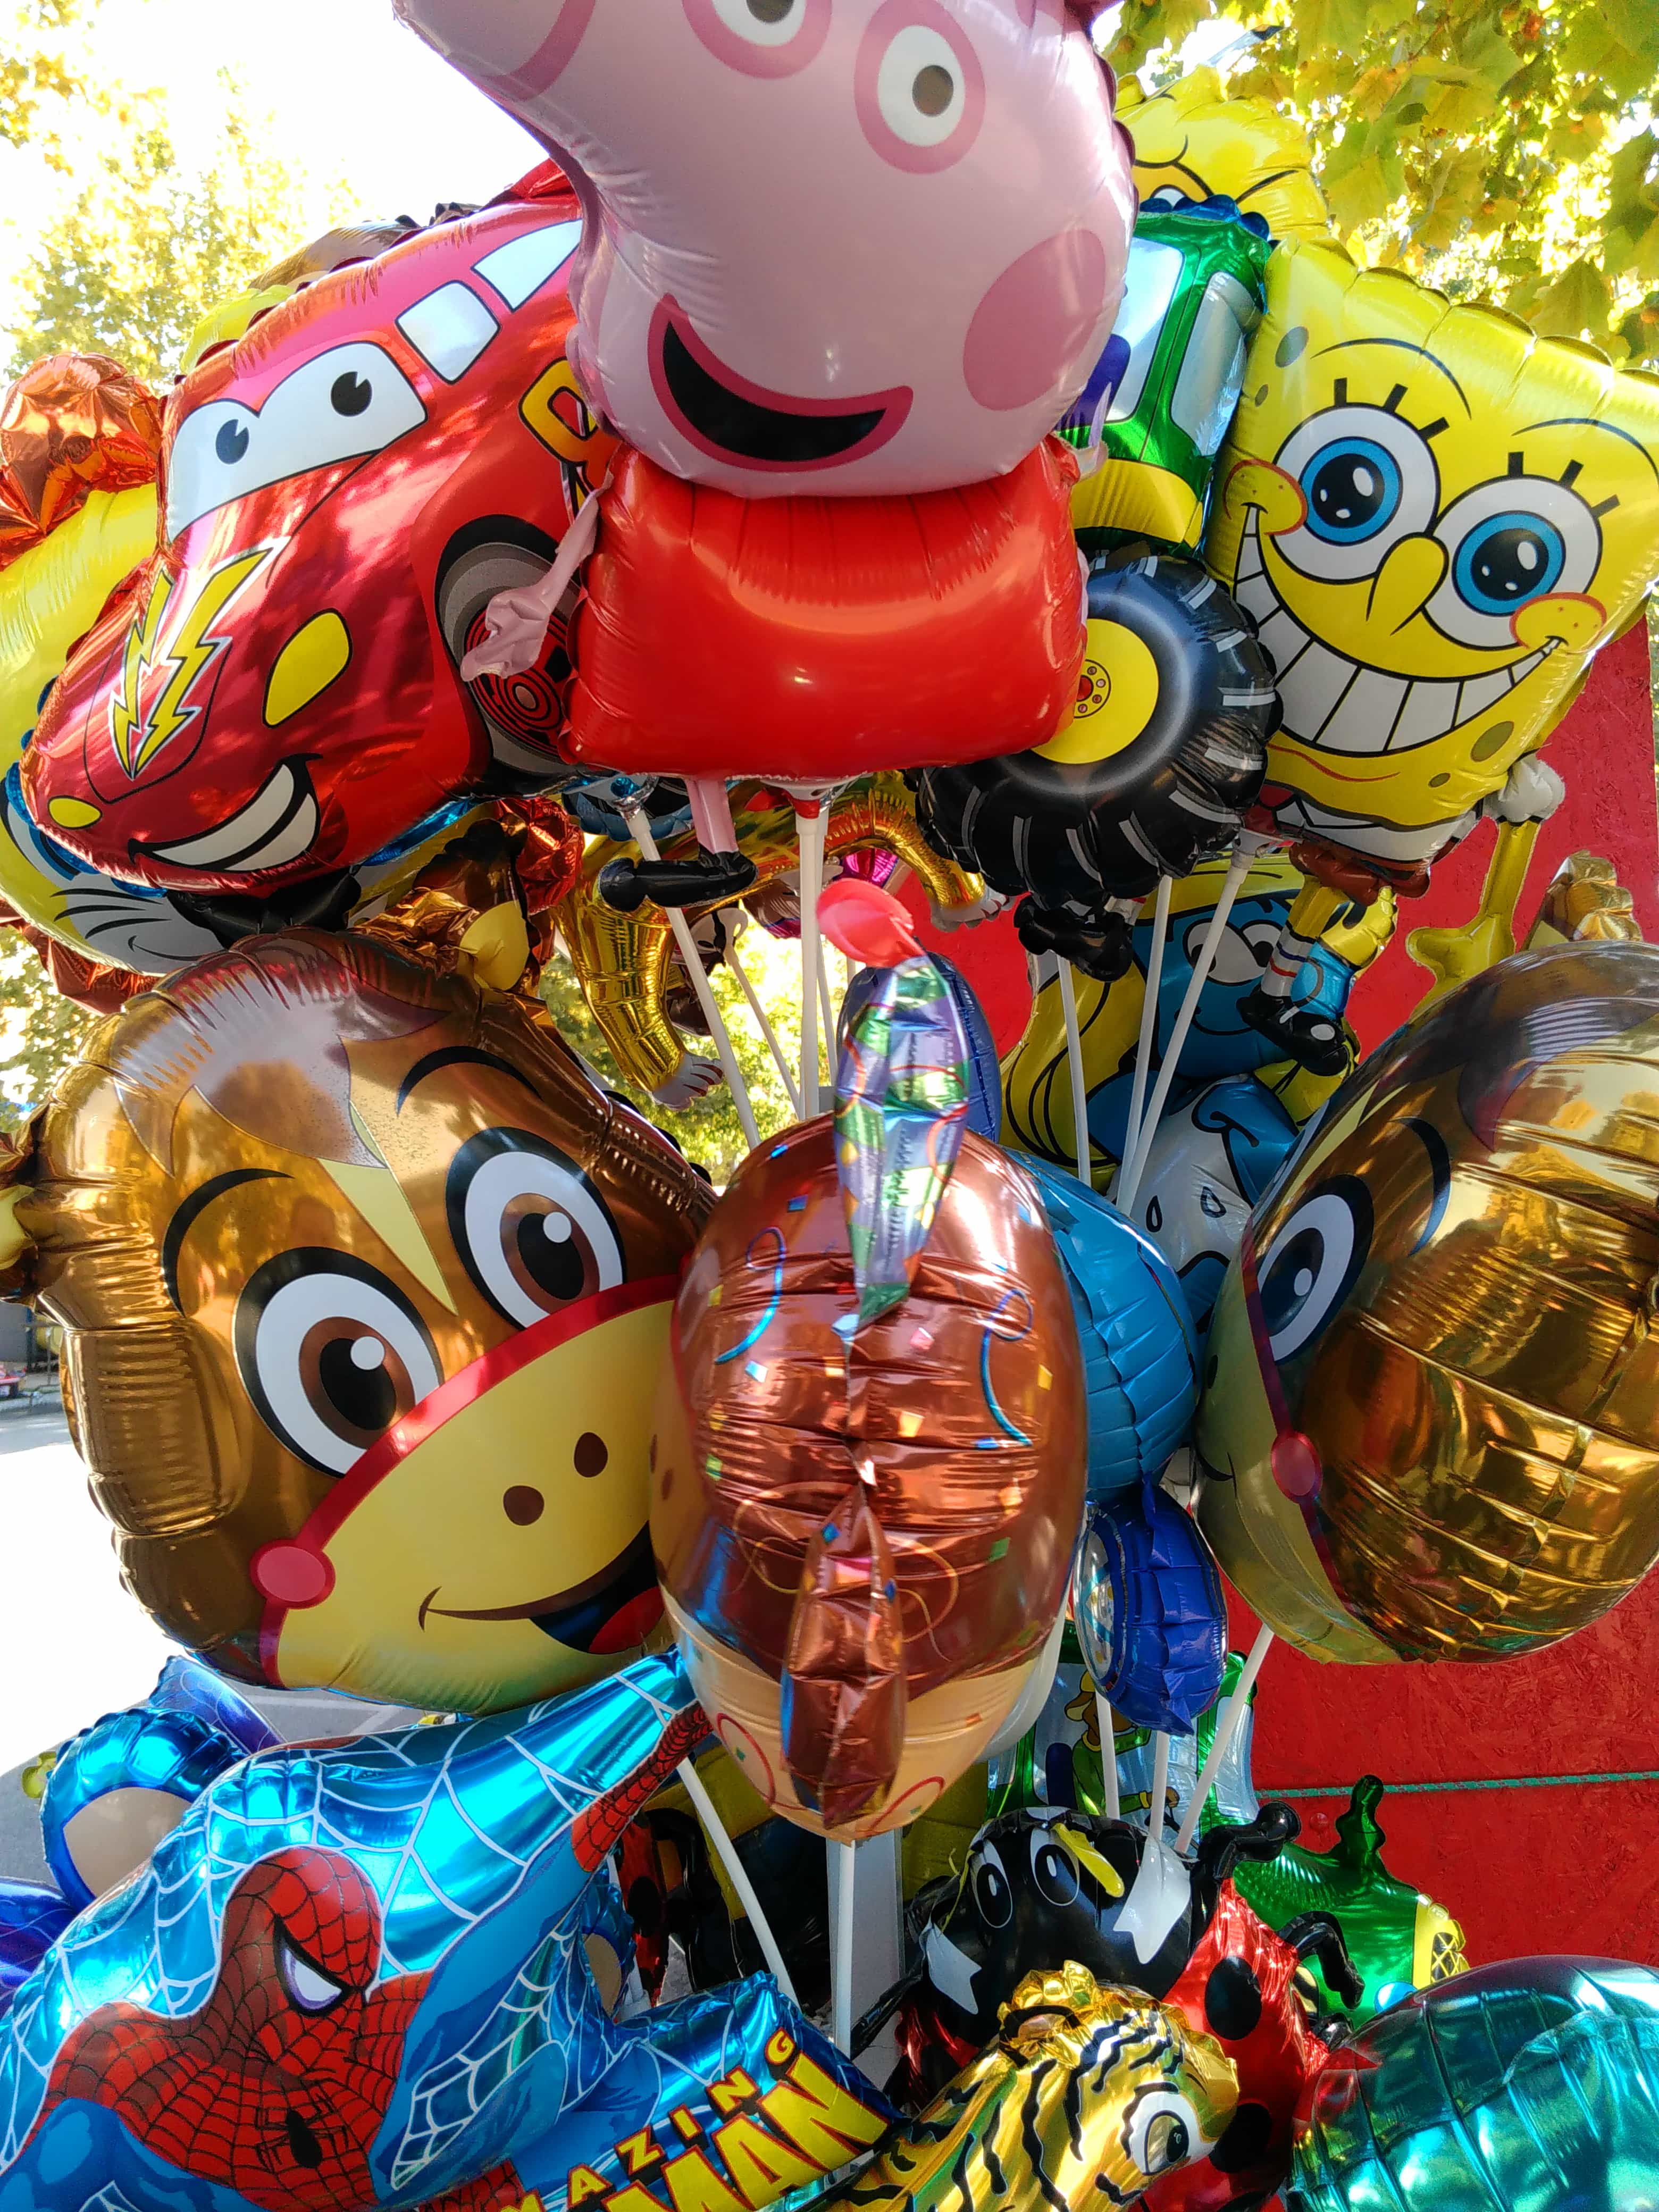 Free picture: colorful, helium, balloon, art, festival, toy, object, outdoor